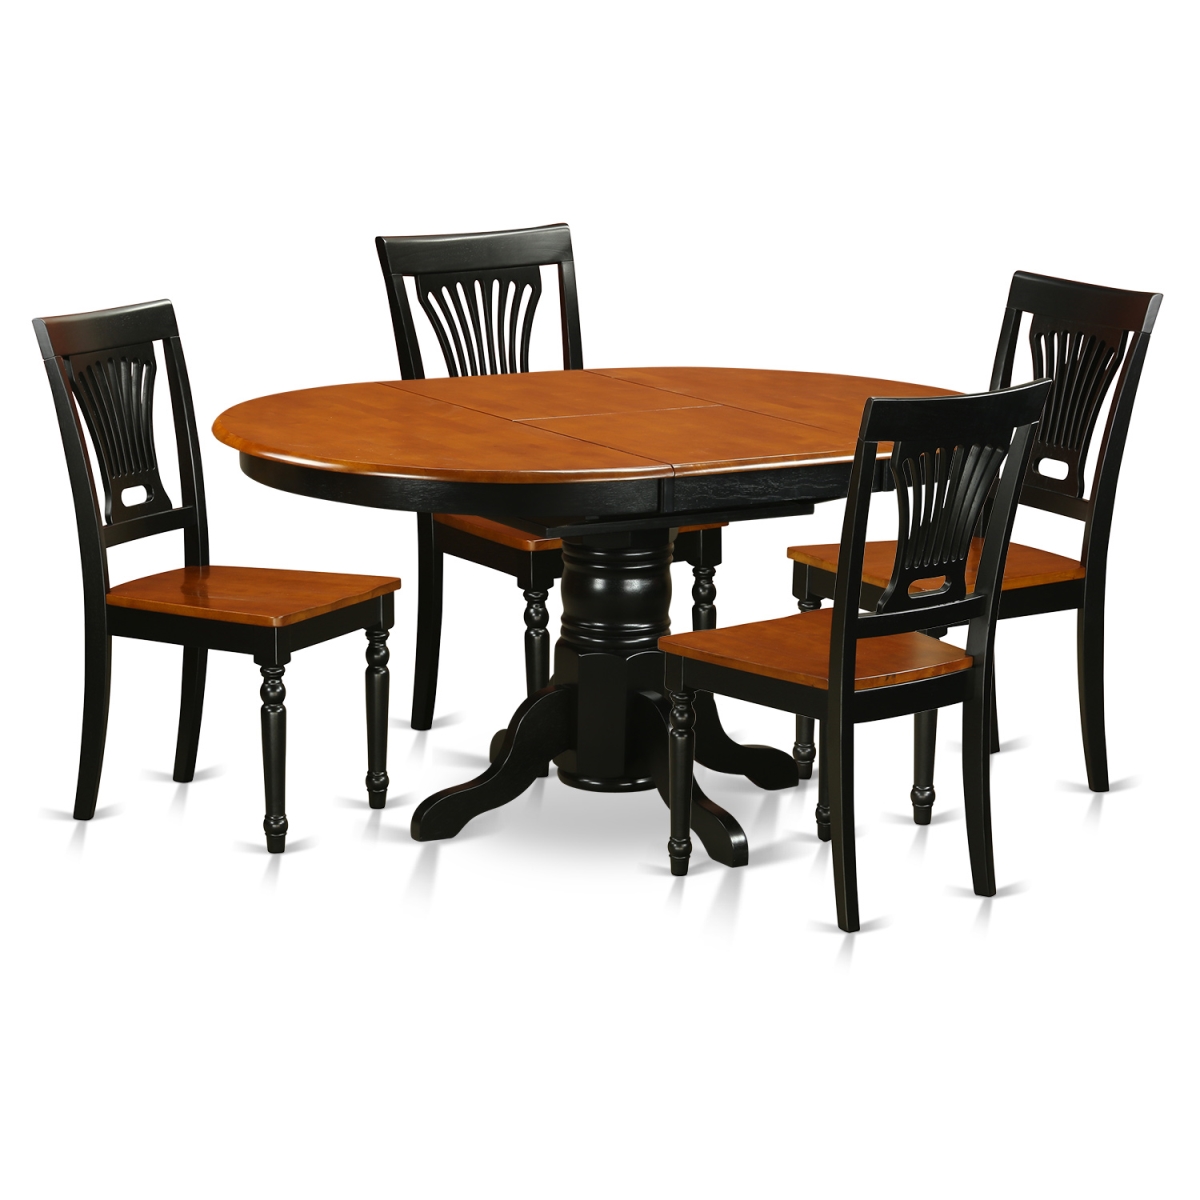 Picture of East West Furniture AVPL5-BCH-W Wood Seat Dining Set with 4 Solid Chairs, Black & Cherry - 5 Piece